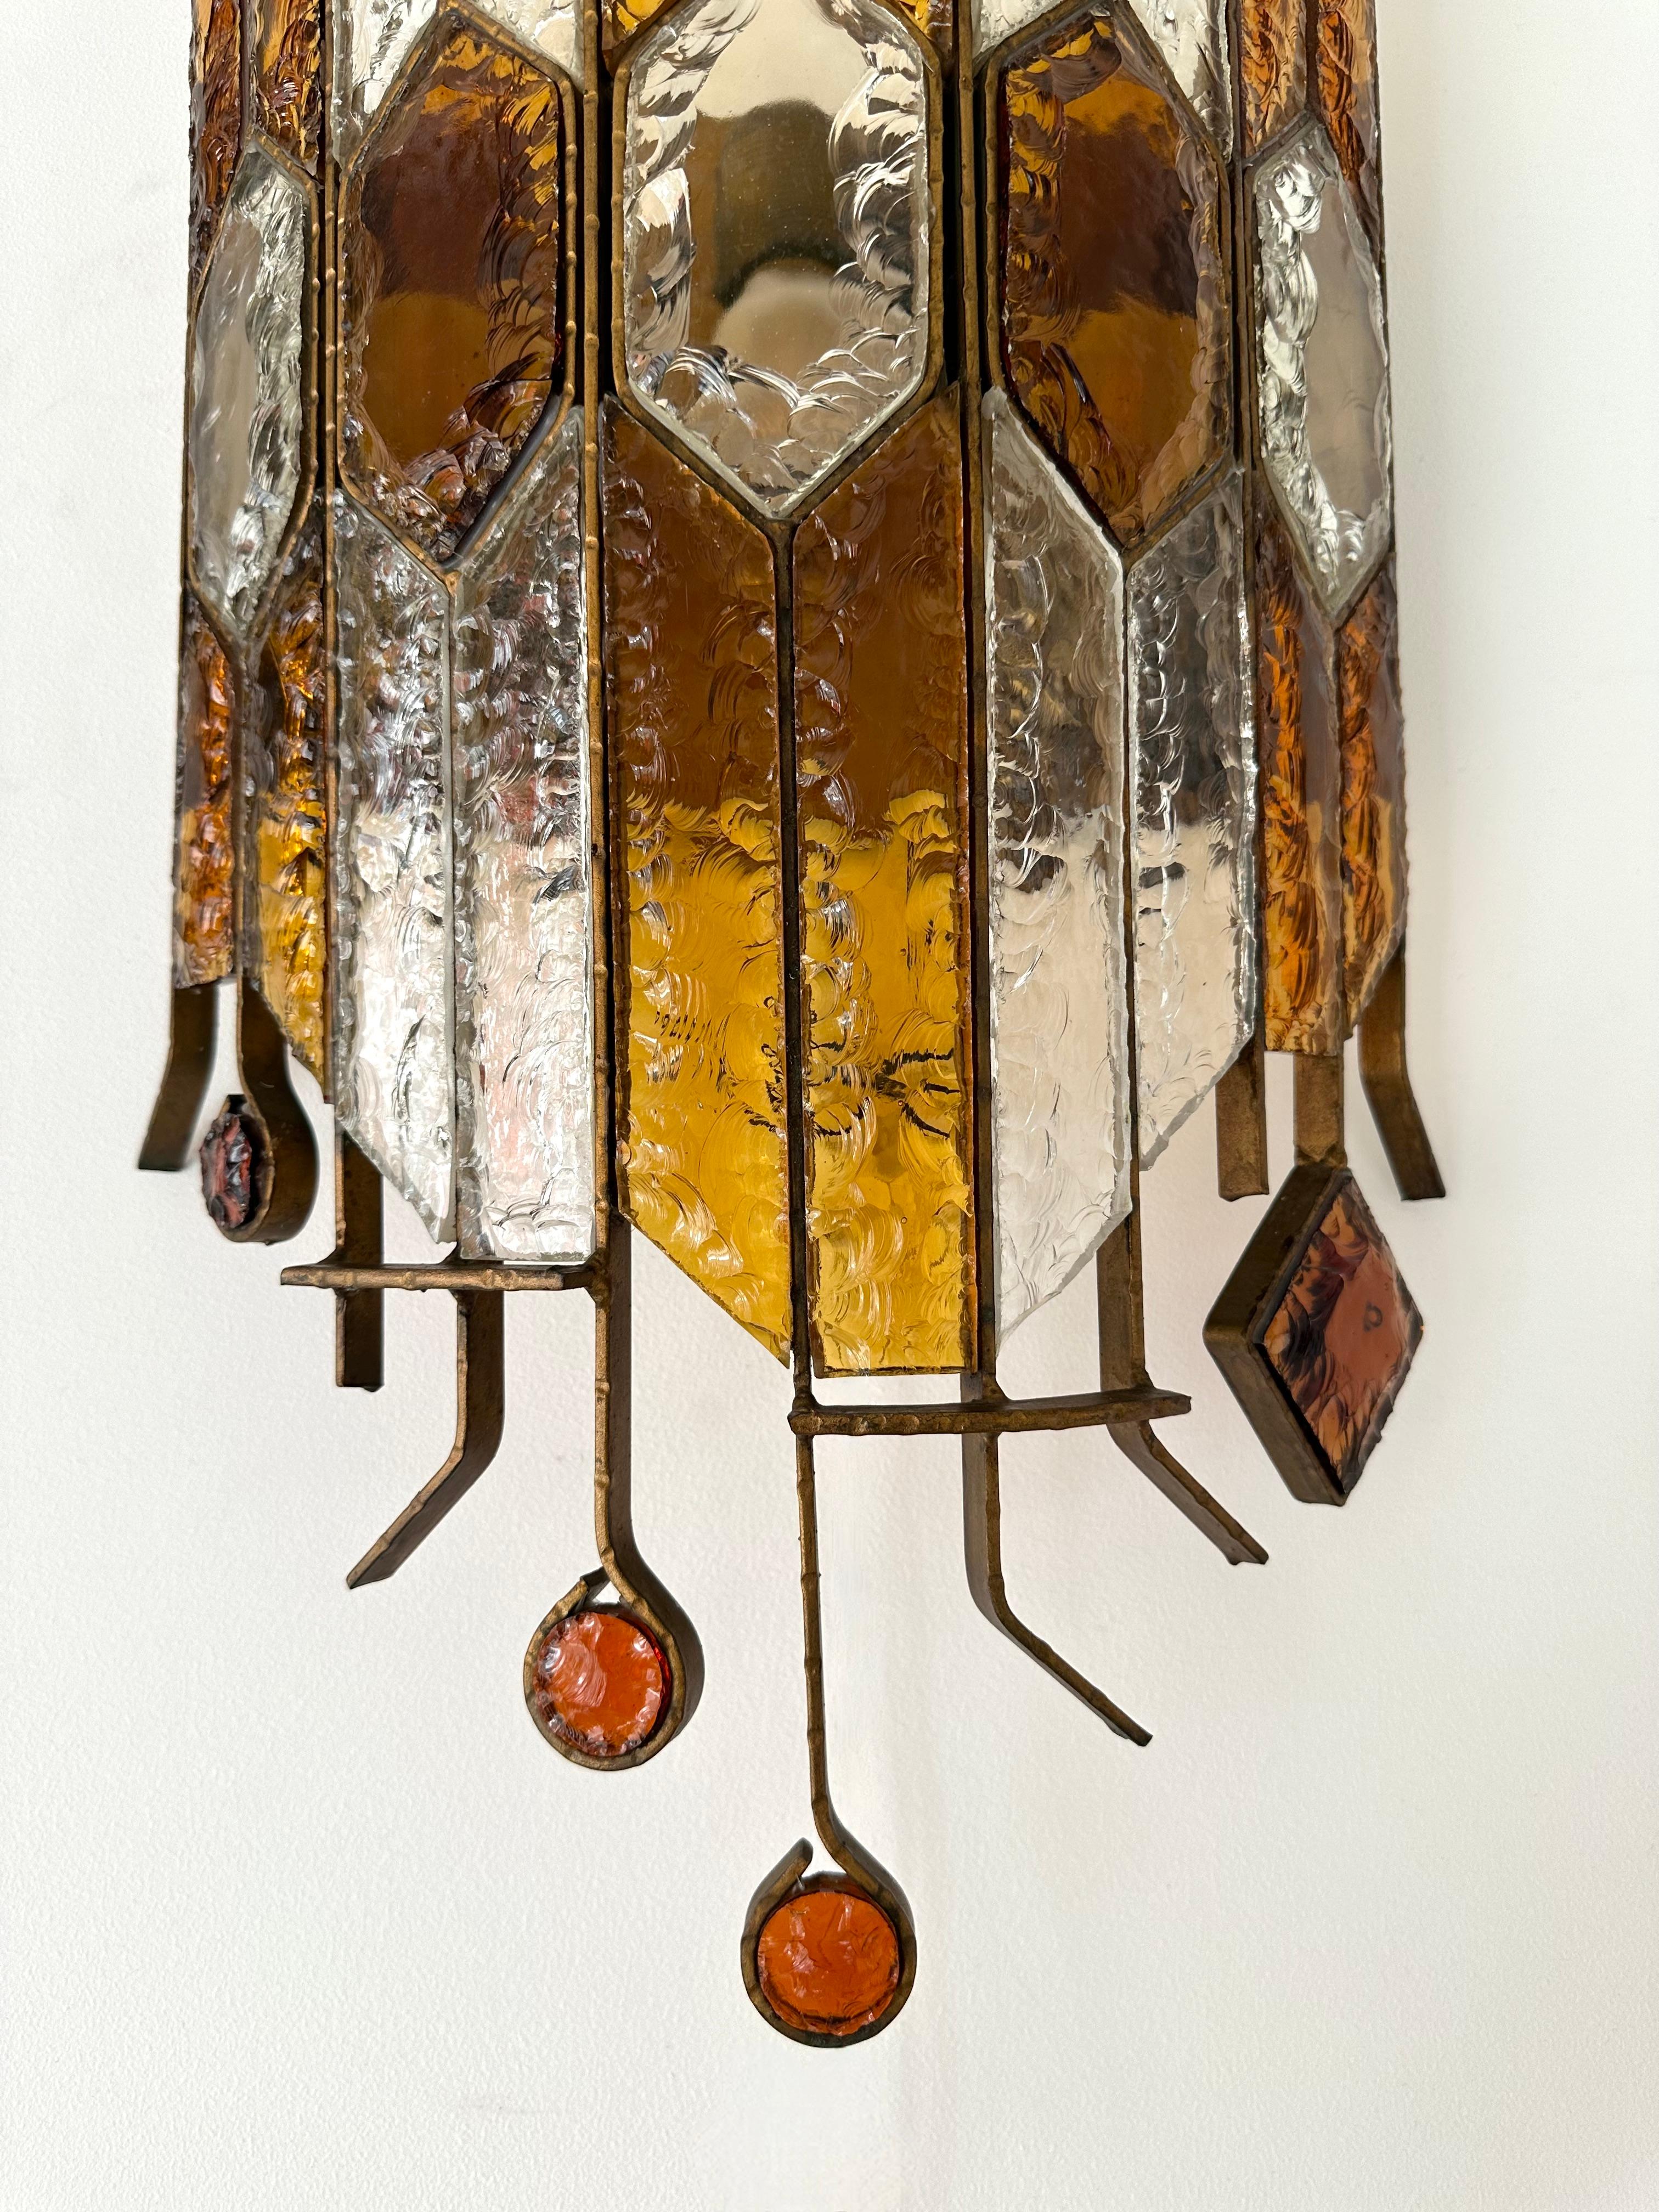 Mid-Century Modern pair of large set of 2 wall lamps lights sconces amber, red and clear hammered glass and wrought iron, gilding gold copper patina, by the manufacture Longobard in Verona in a Brutalist style, the concurrent of Biancardi Jordan